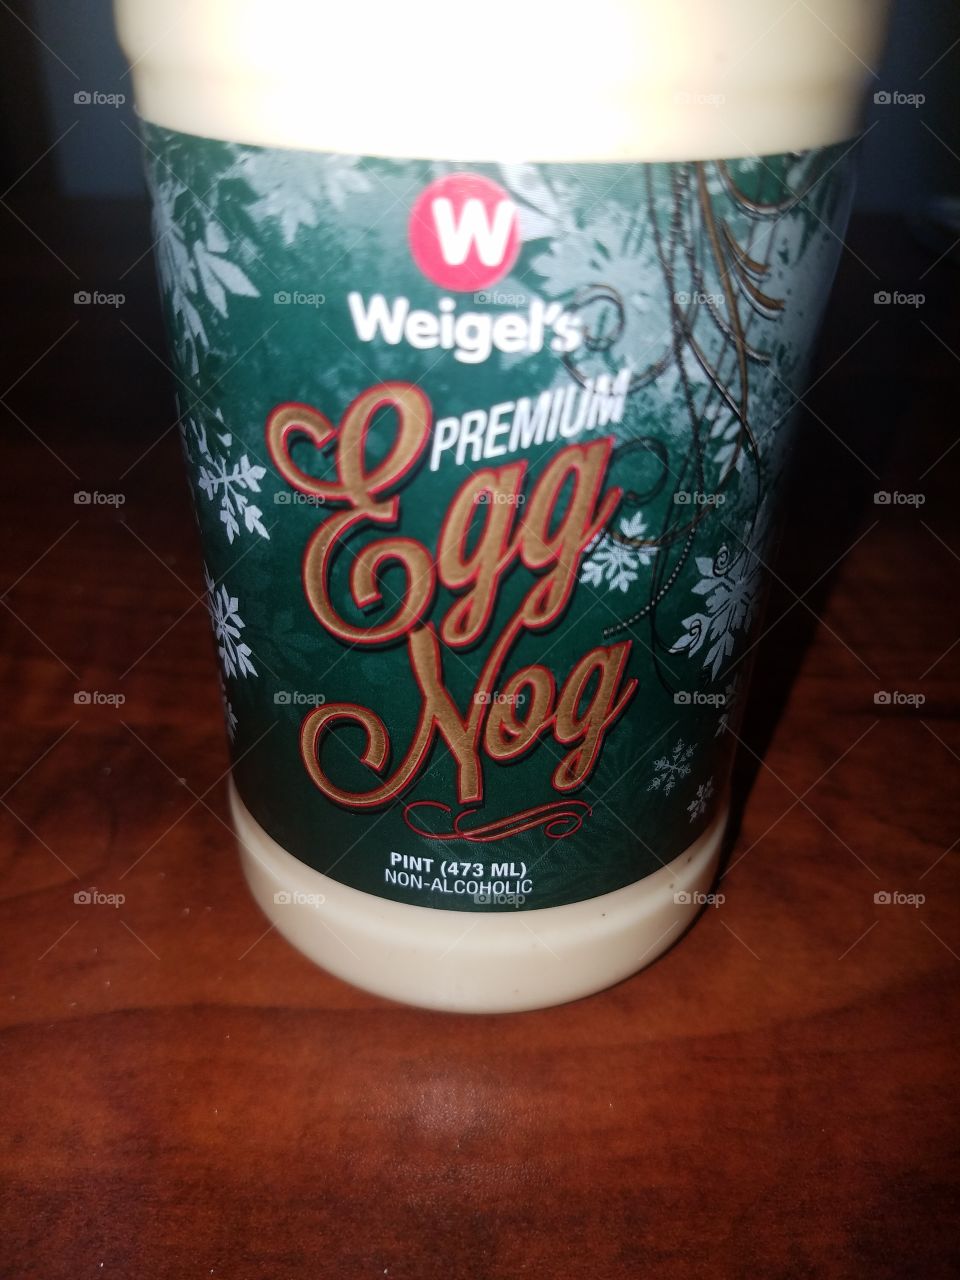 Egg Nog time of the year.